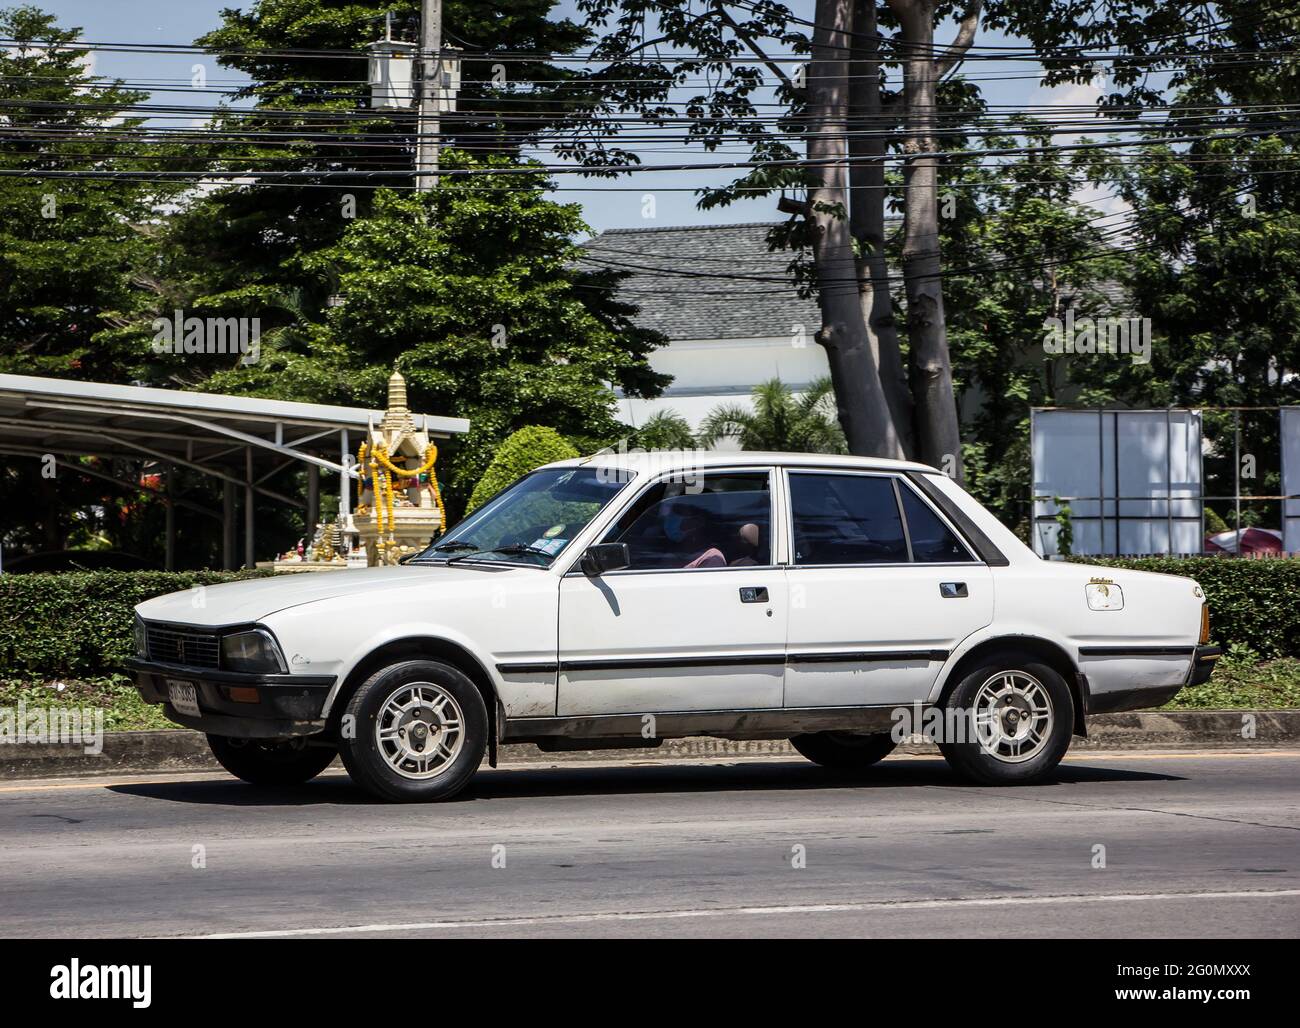 Chiangmai, Thailand - May  3 2021: Private Old Car, Peugeot 505 GR. Photo at road no.121 about 8 km from downtown Chiangmai, thailand. Stock Photo